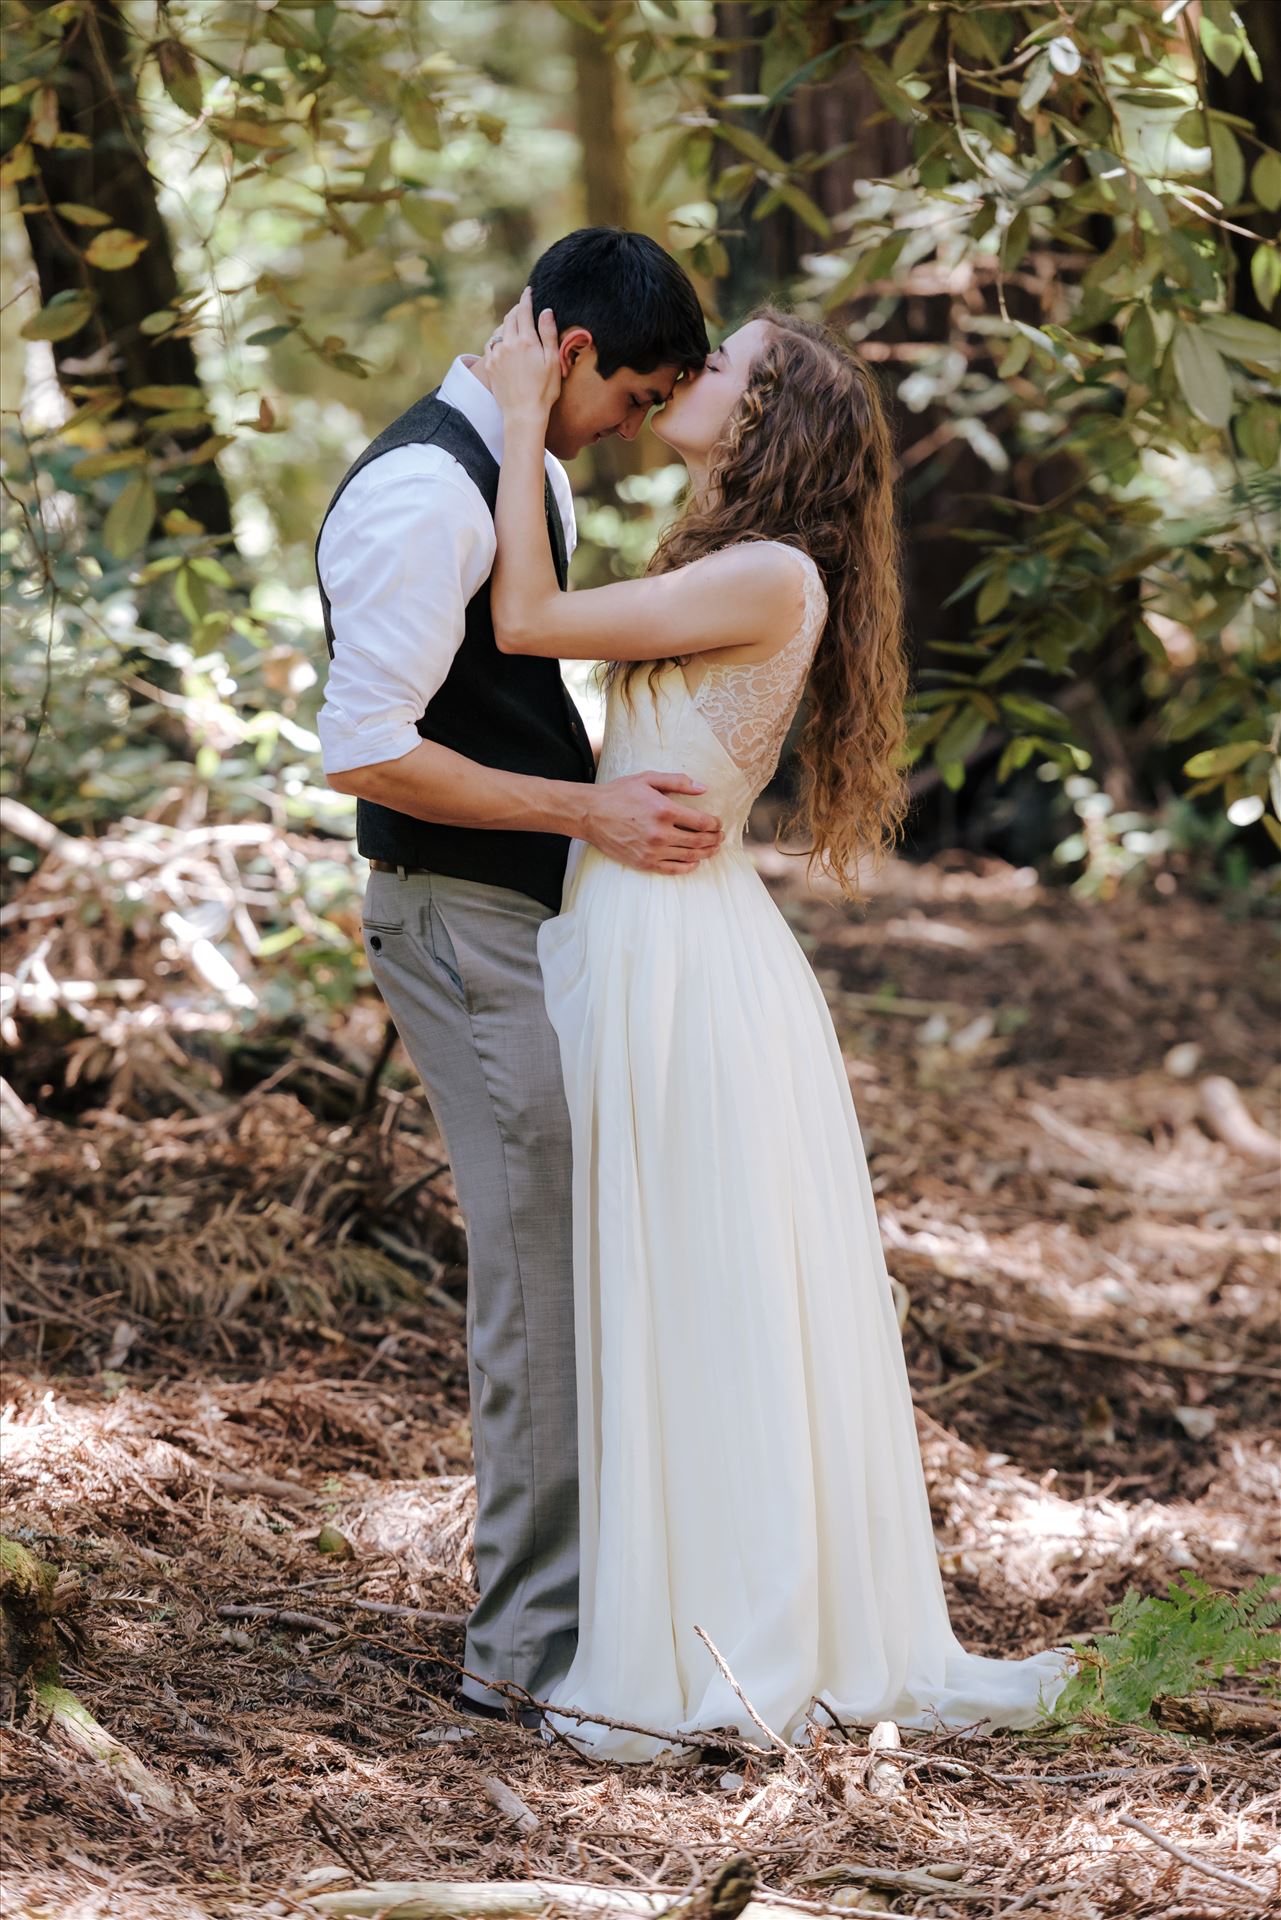 FW-6044.JPG - Mt Madonna wedding in the redwoods outside of Watsonville, California with a romantic and classic vibe by sarah williams of mirror's edge photography a san luis obispo wedding photographer.  Bride kisses groom in the trees by Sarah Williams